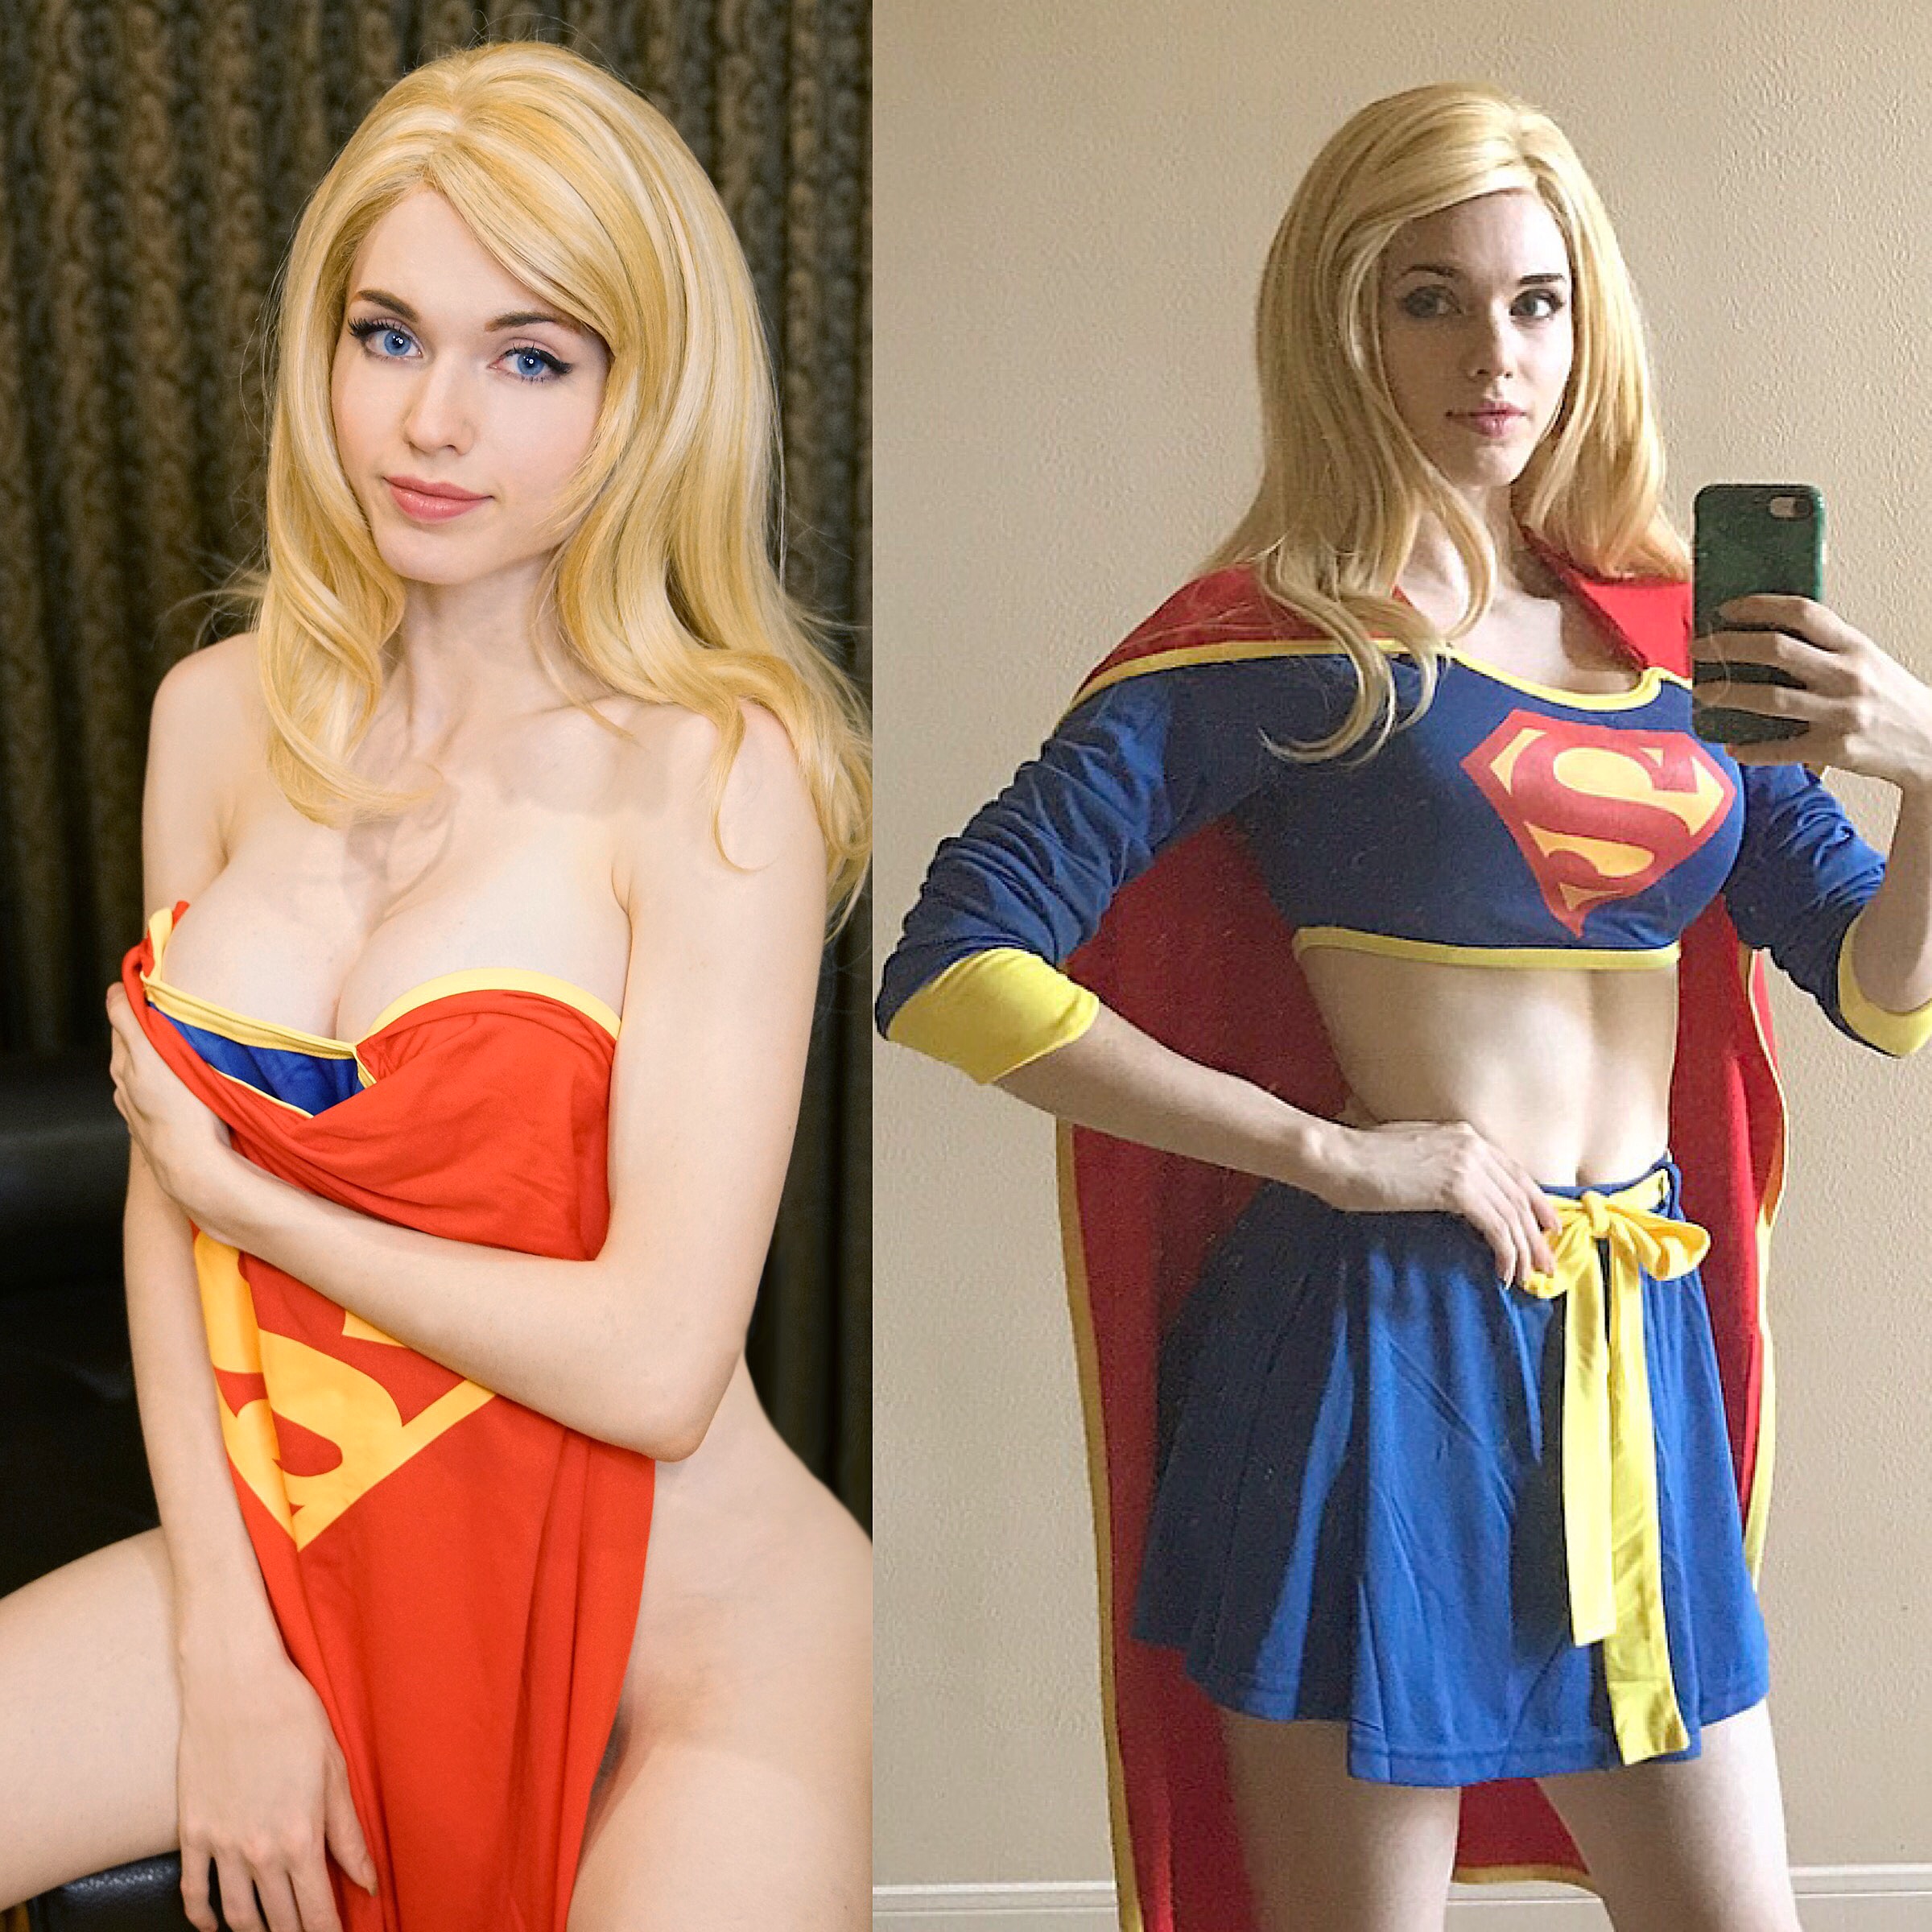 Cosplay of hot supergirl